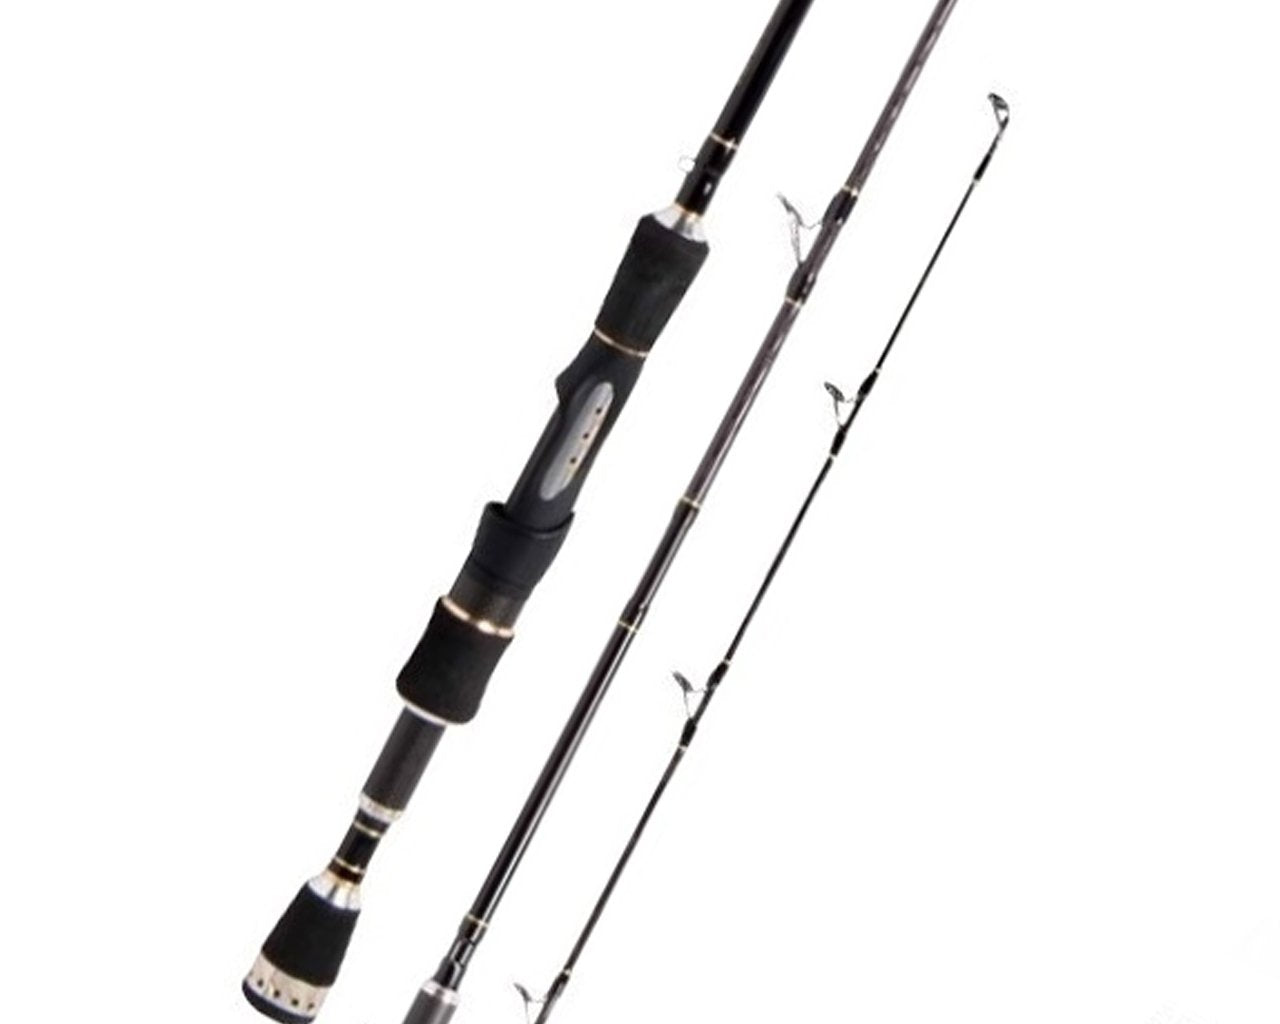 Fishing Rods For Sale - Shop for Spin, Overhead, Baitcast & more Page 9